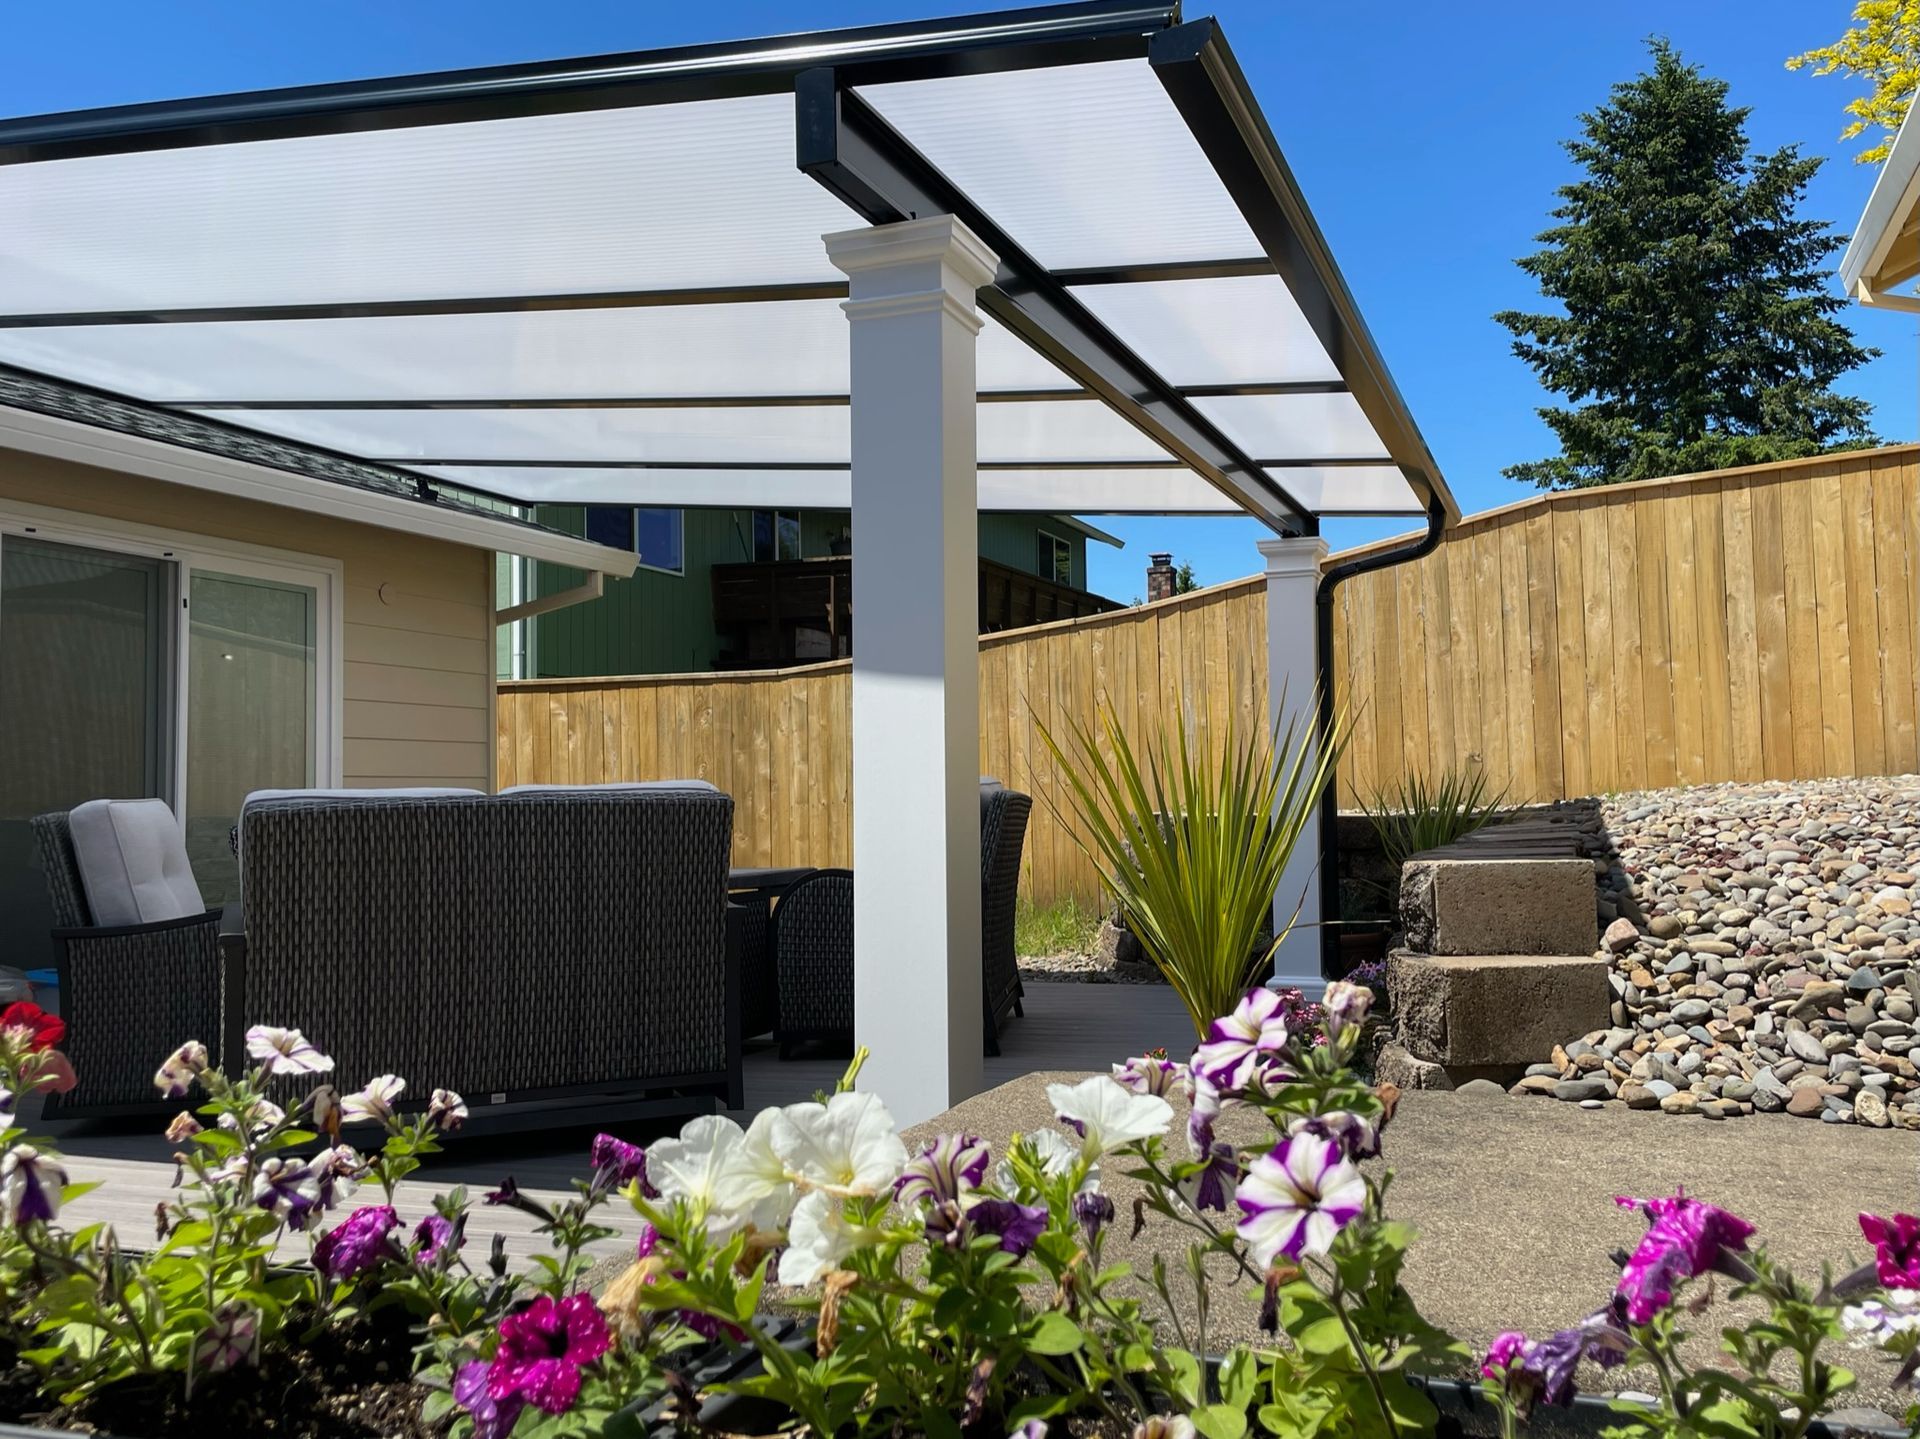 Patio Cover with Shed Style Roof: Crown Patio Covers in Portland Oregon